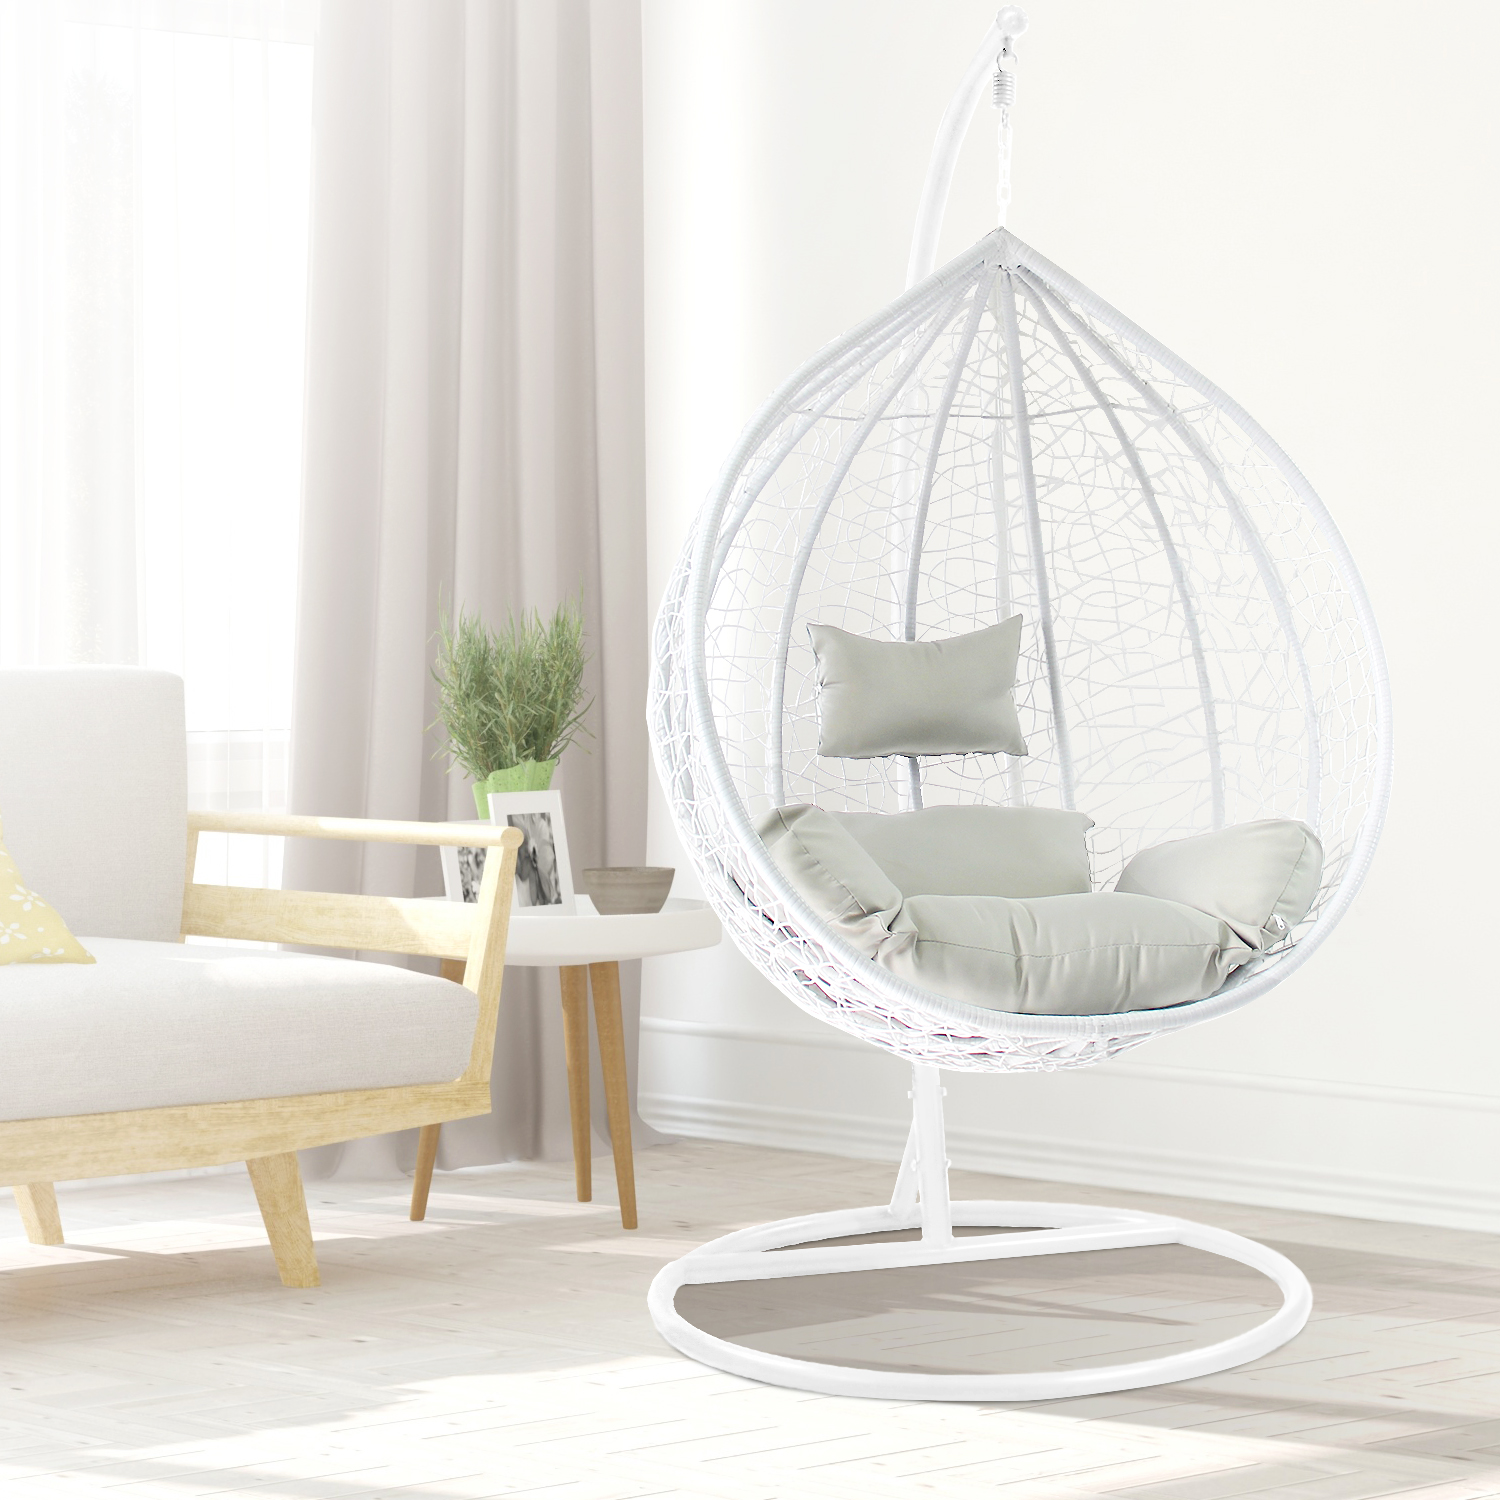 Patio Swing Chair Outdoor Wicker Tear Drop with Gray Cushion Snow White Living Room - image 2 of 8